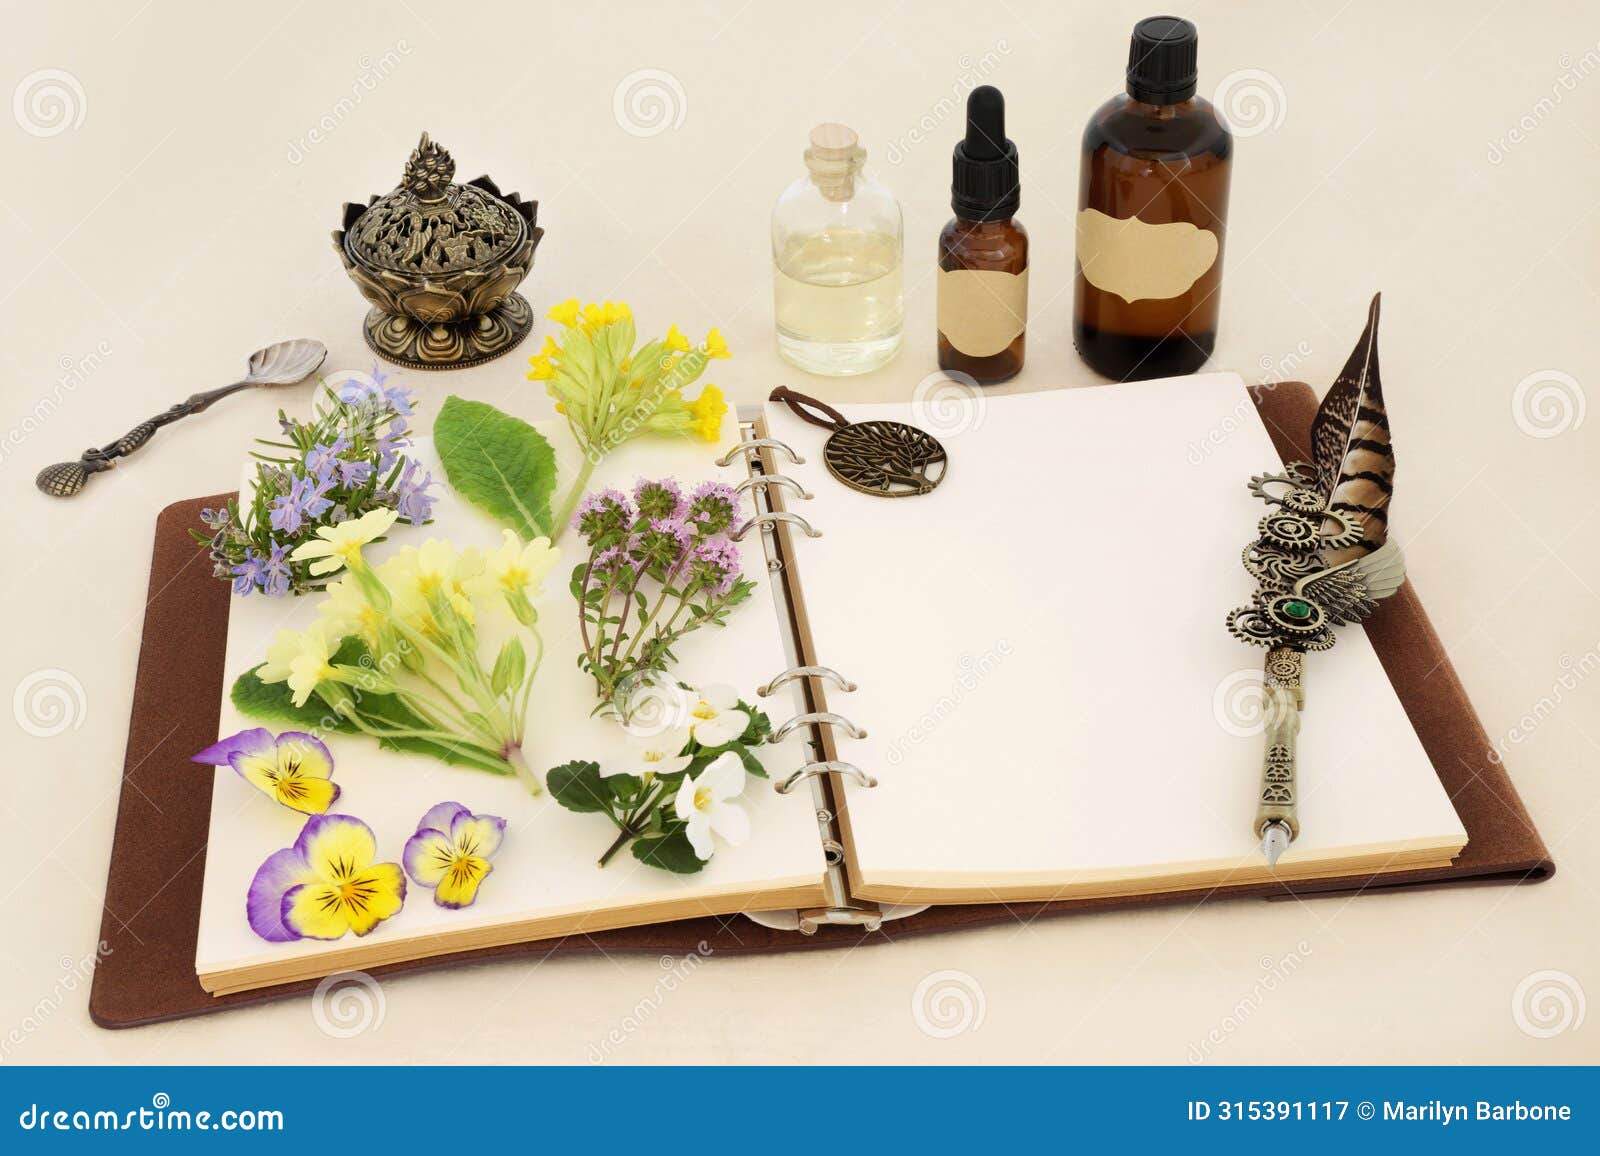 traditional preparation of homeopathic herbal medicine